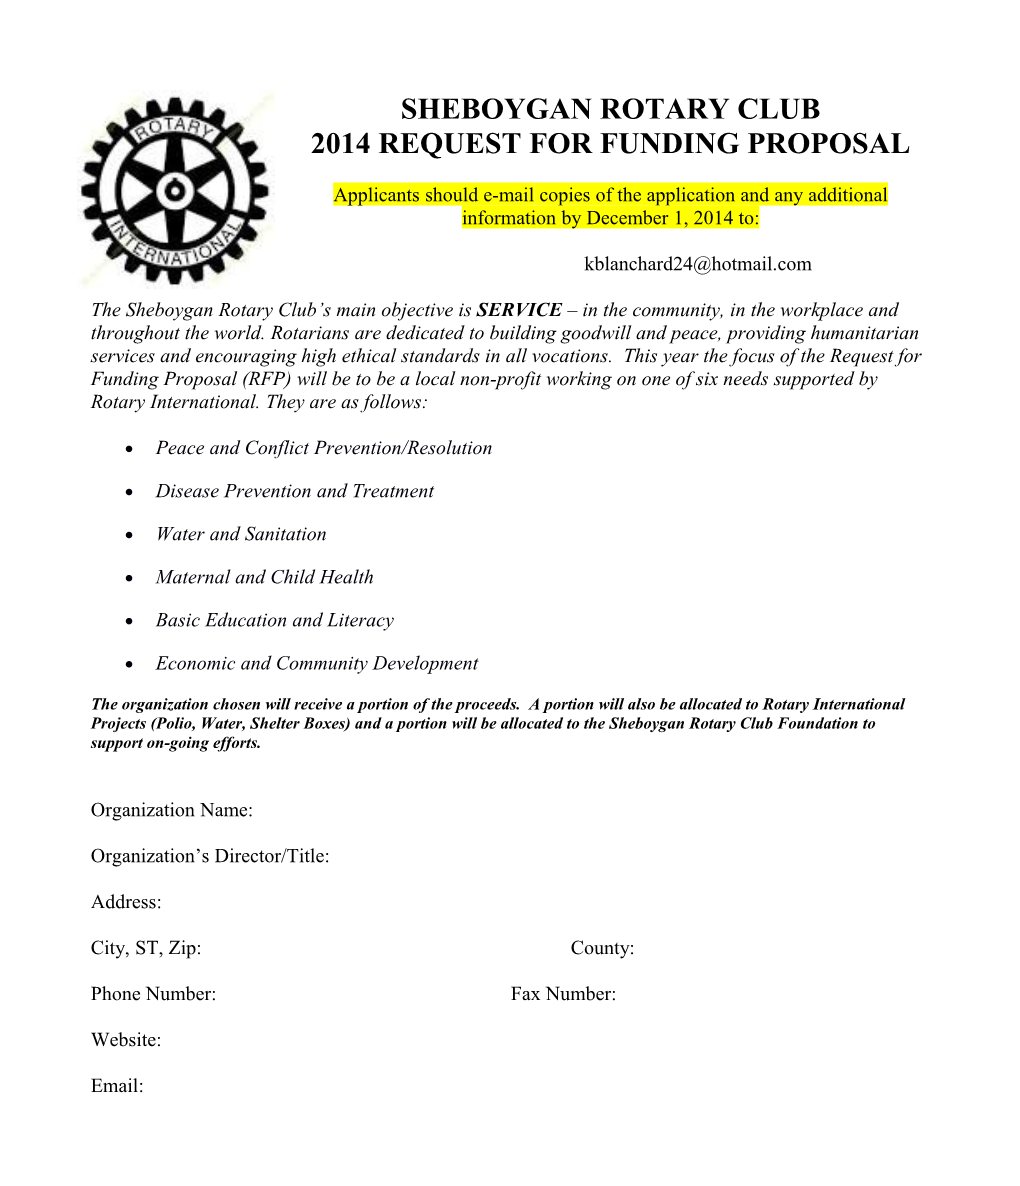 2014Request for Funding Proposal